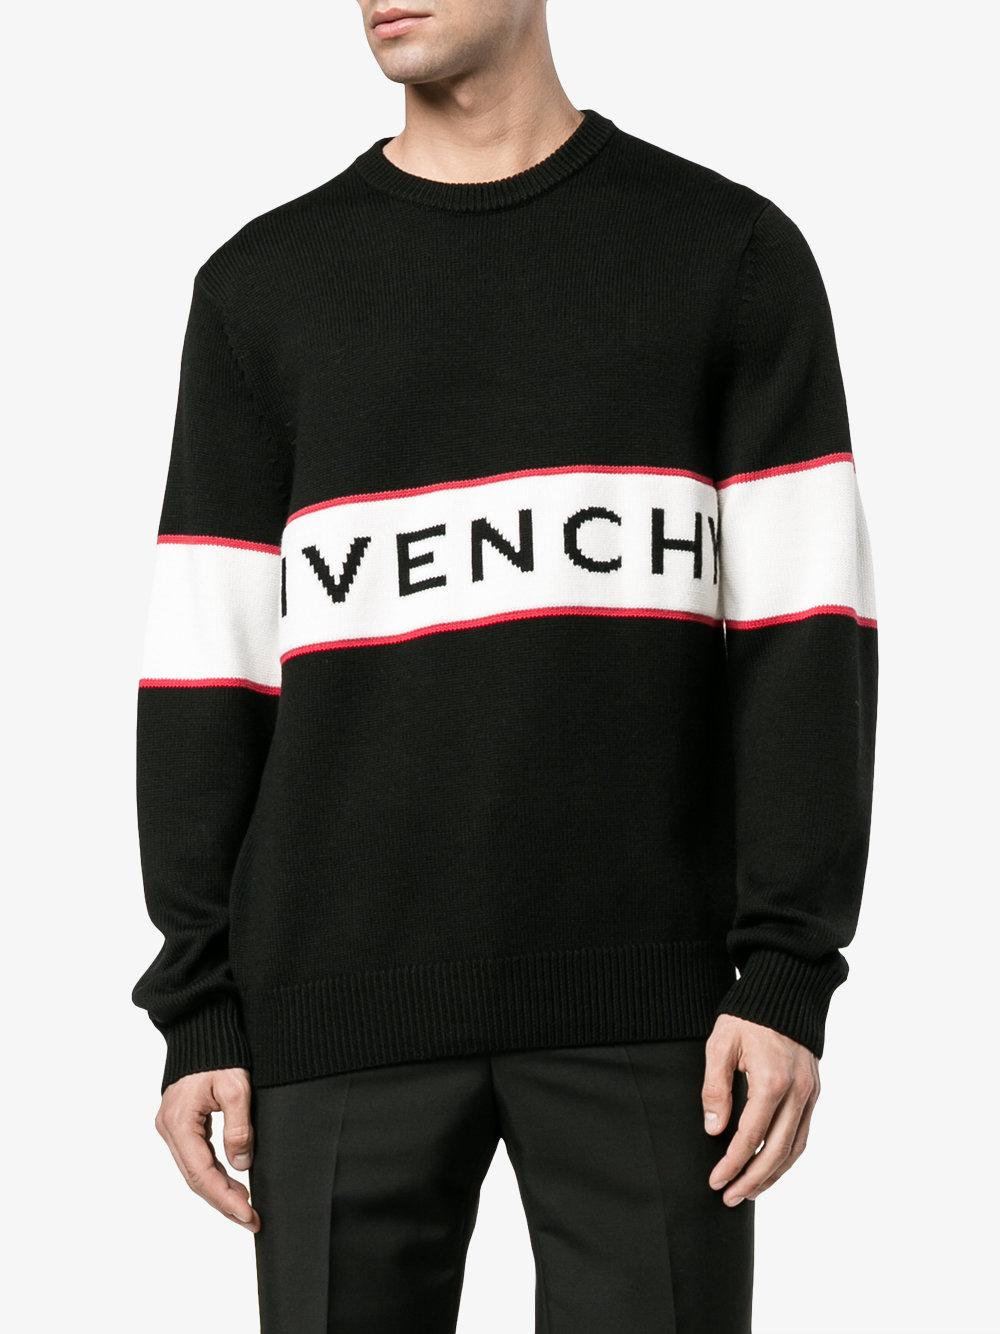 Givenchy Wool Logo Intarsia Knitted Jumper in Black for Men - Lyst